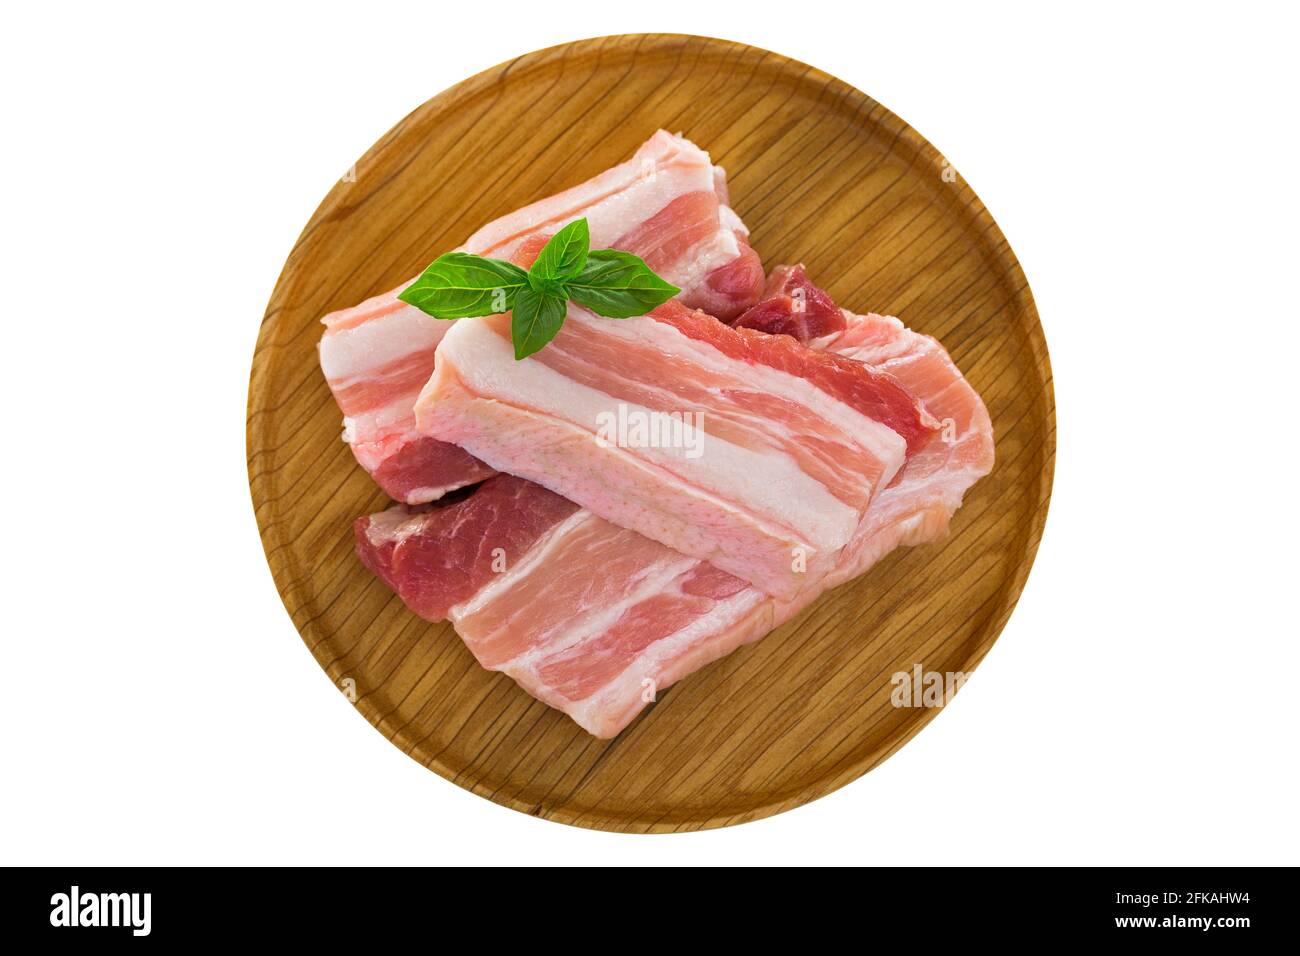 Slices of raw fresh pork belly cut on wooden plate isolated on white background Stock Photo